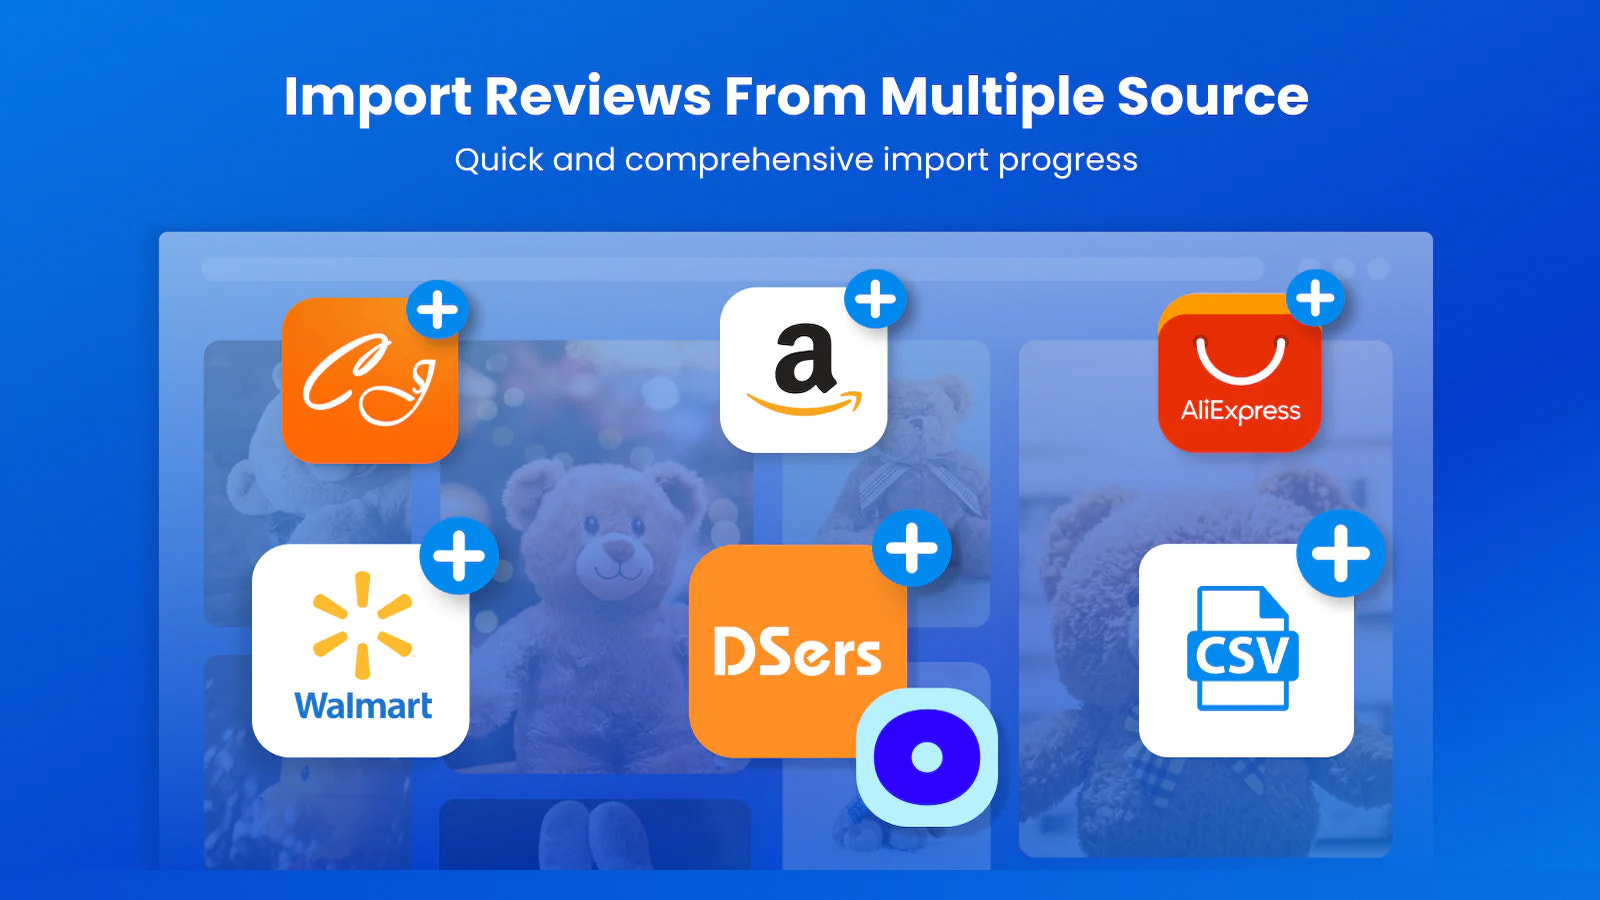 Amazon reviews importer, AliExpress review and other sources